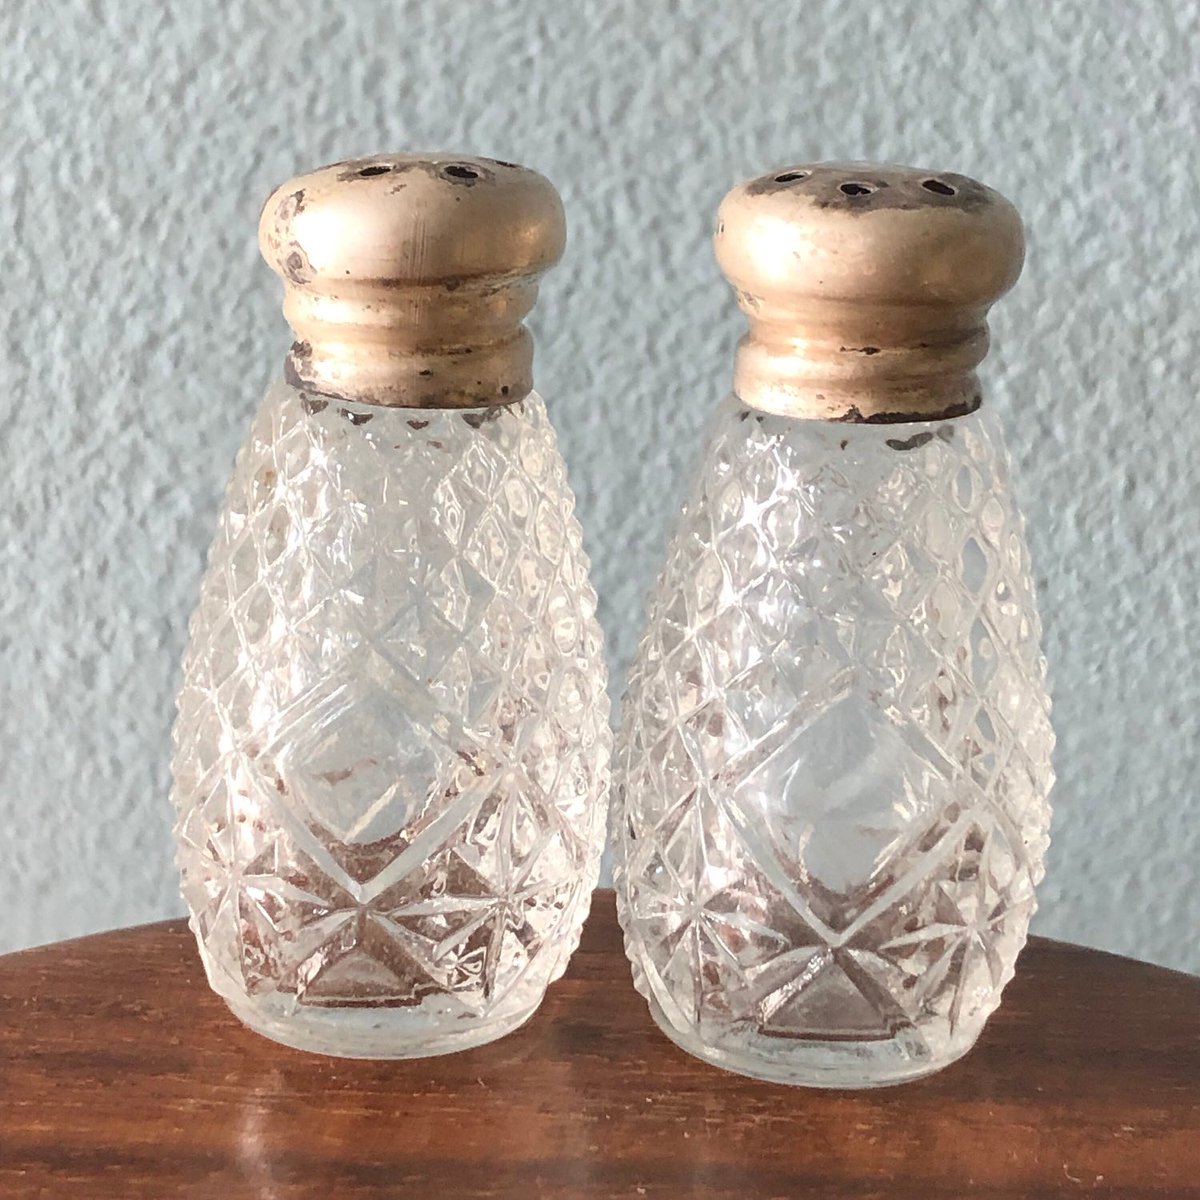 Molded Glass Mini Salt and Pepper Shakers with Sterling Silver Screw Caps. bindisboutiquebysara.etsy.com/listing/162709… #vintagesterling #vintagesilver #vintageglass #vintagedining